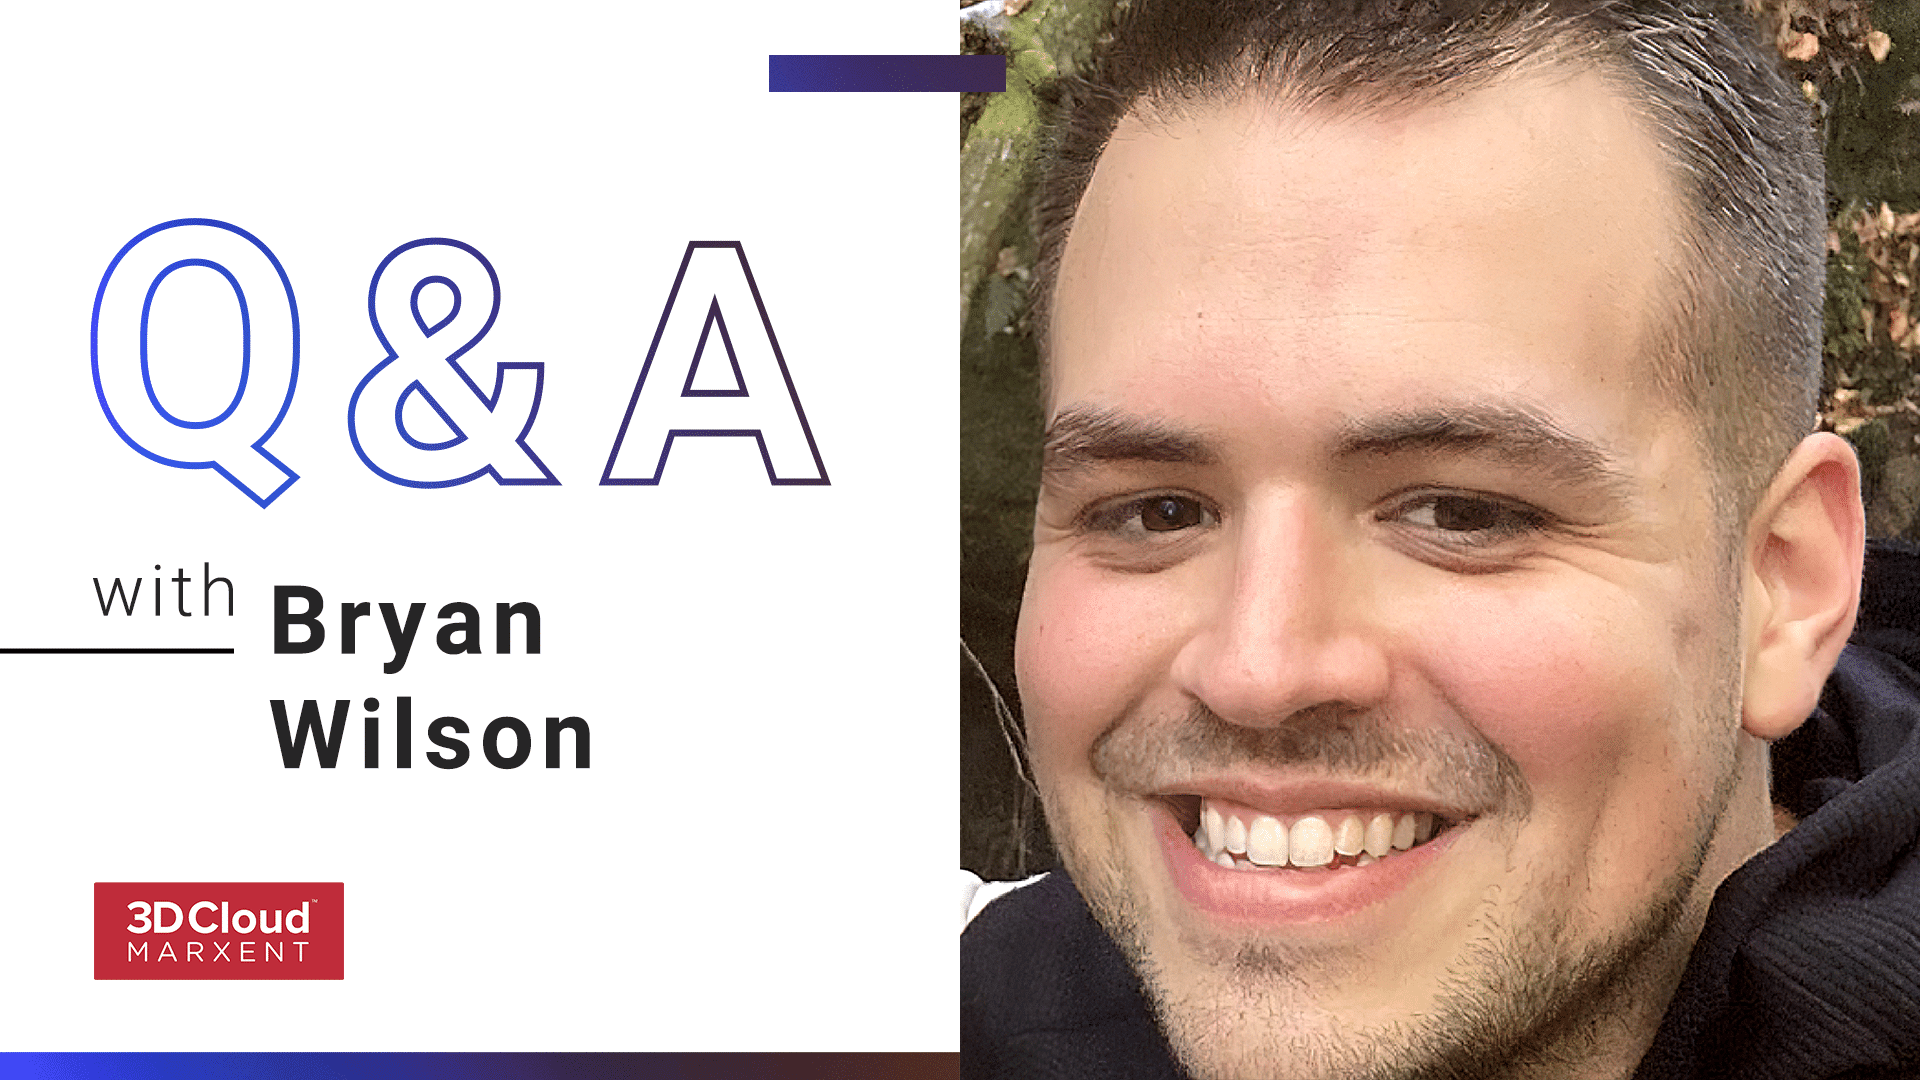 Employee Q&A with Bryan Wilson